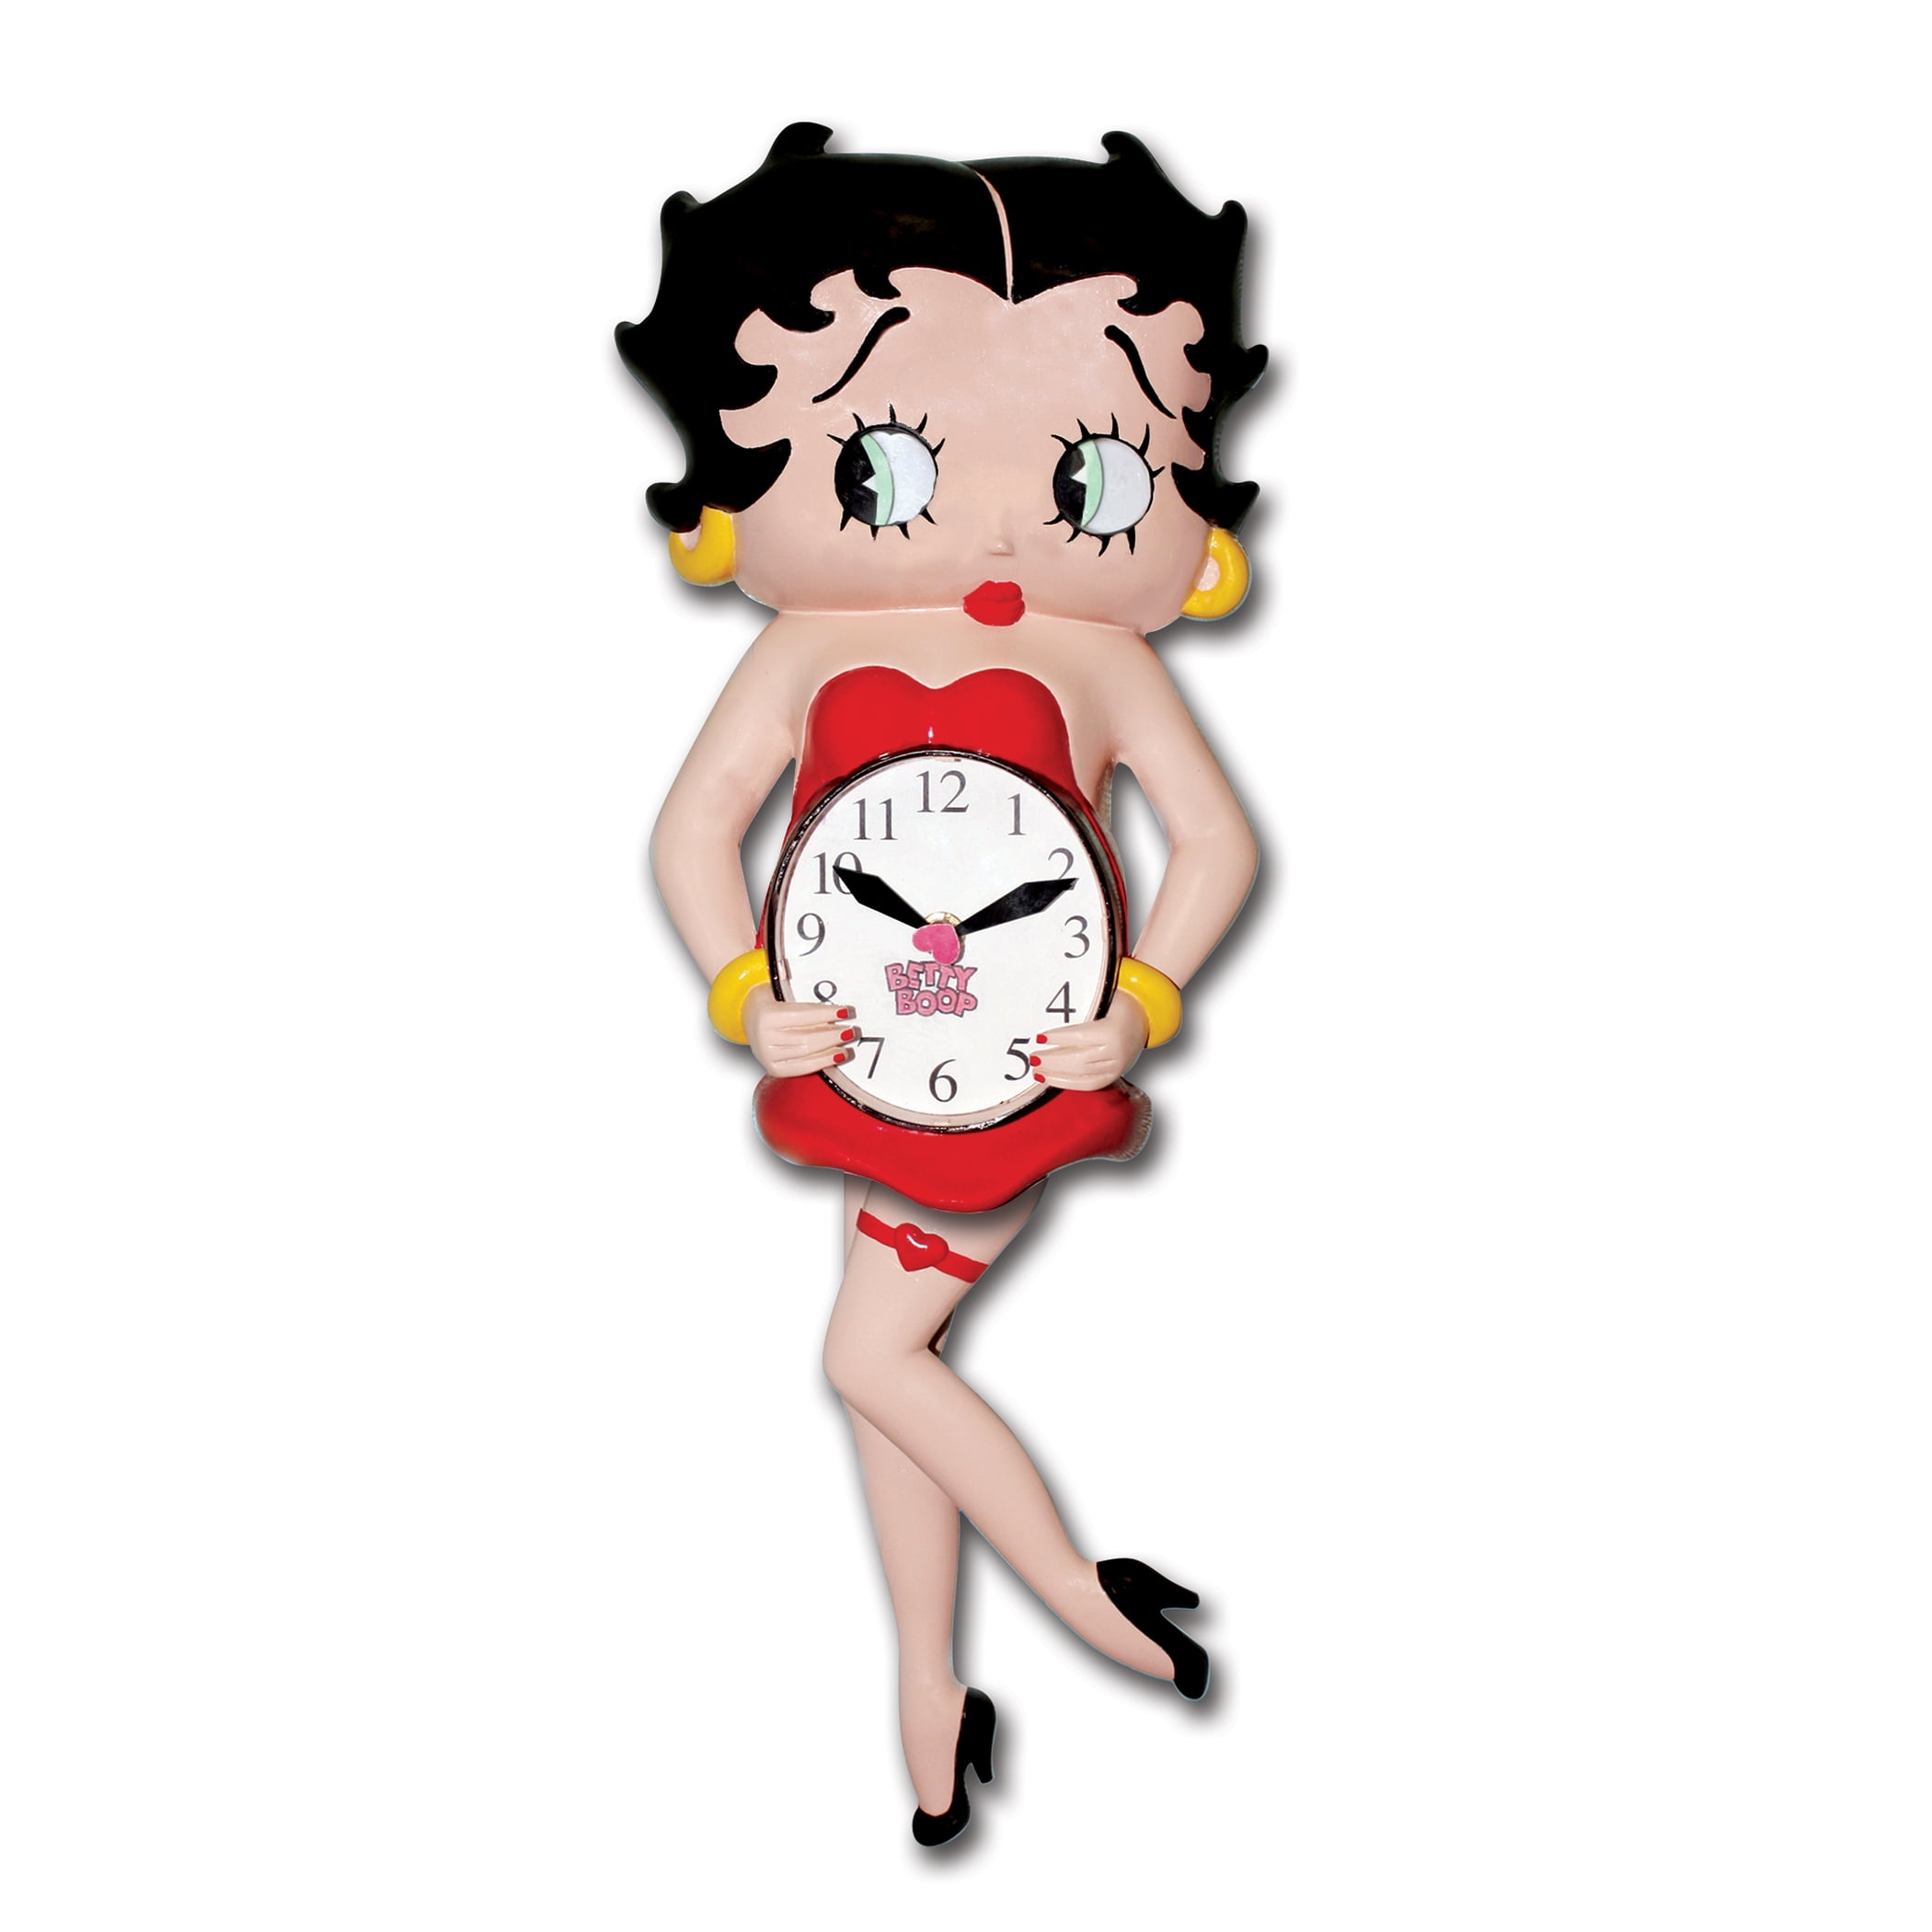 Betty Boop Frameless Borderless Wall Clock Nice For Gifts or Decor Z61 